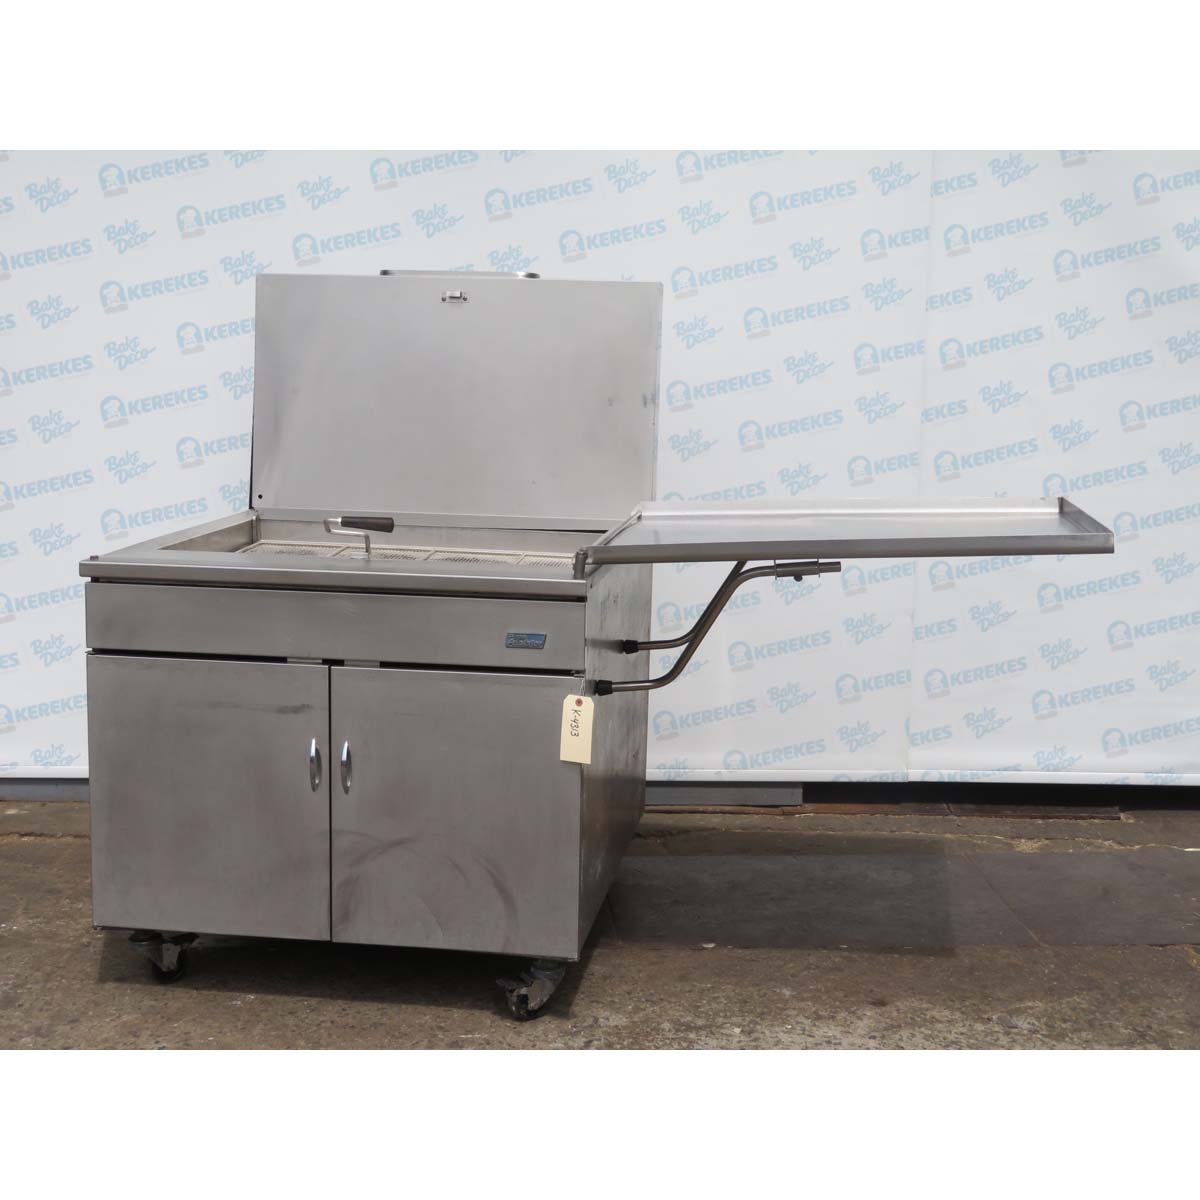 Pitco 34PS Gas Donut Fryer, 210 Lb Oil Capacity, Used Excellent Condition